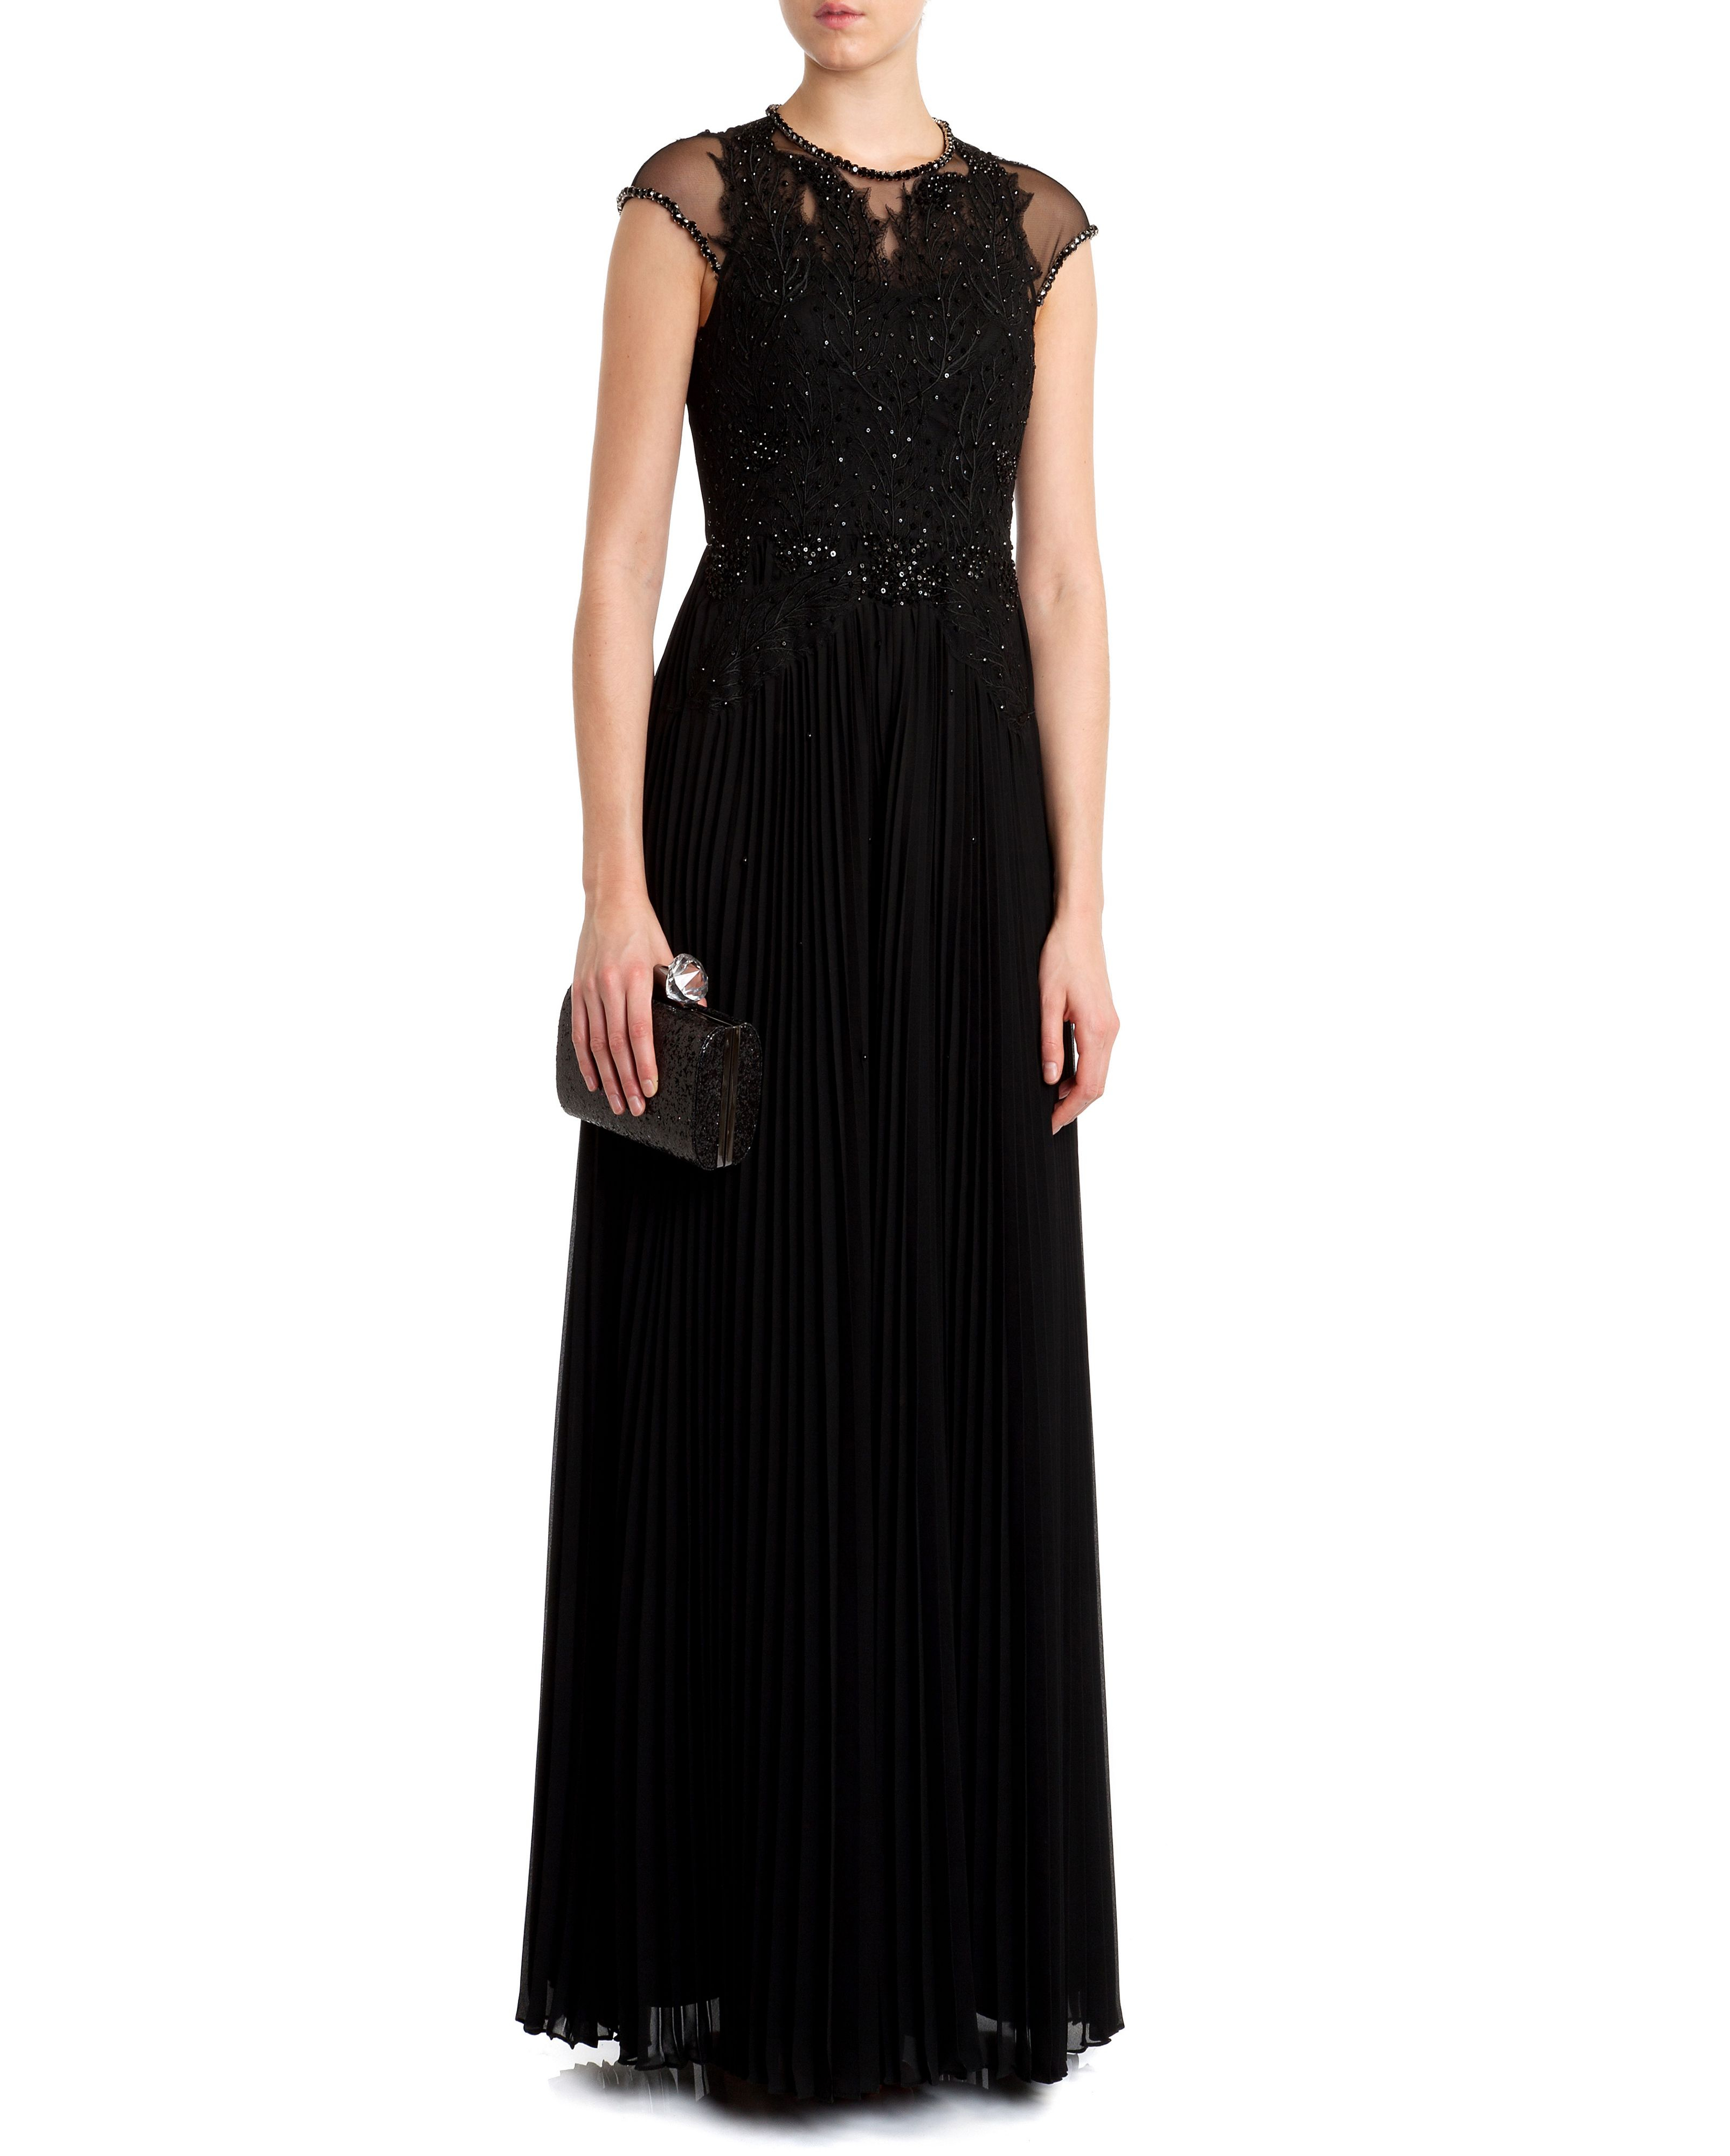 Ted baker Lumina Feather Applique Maxi Dress in Black | Lyst